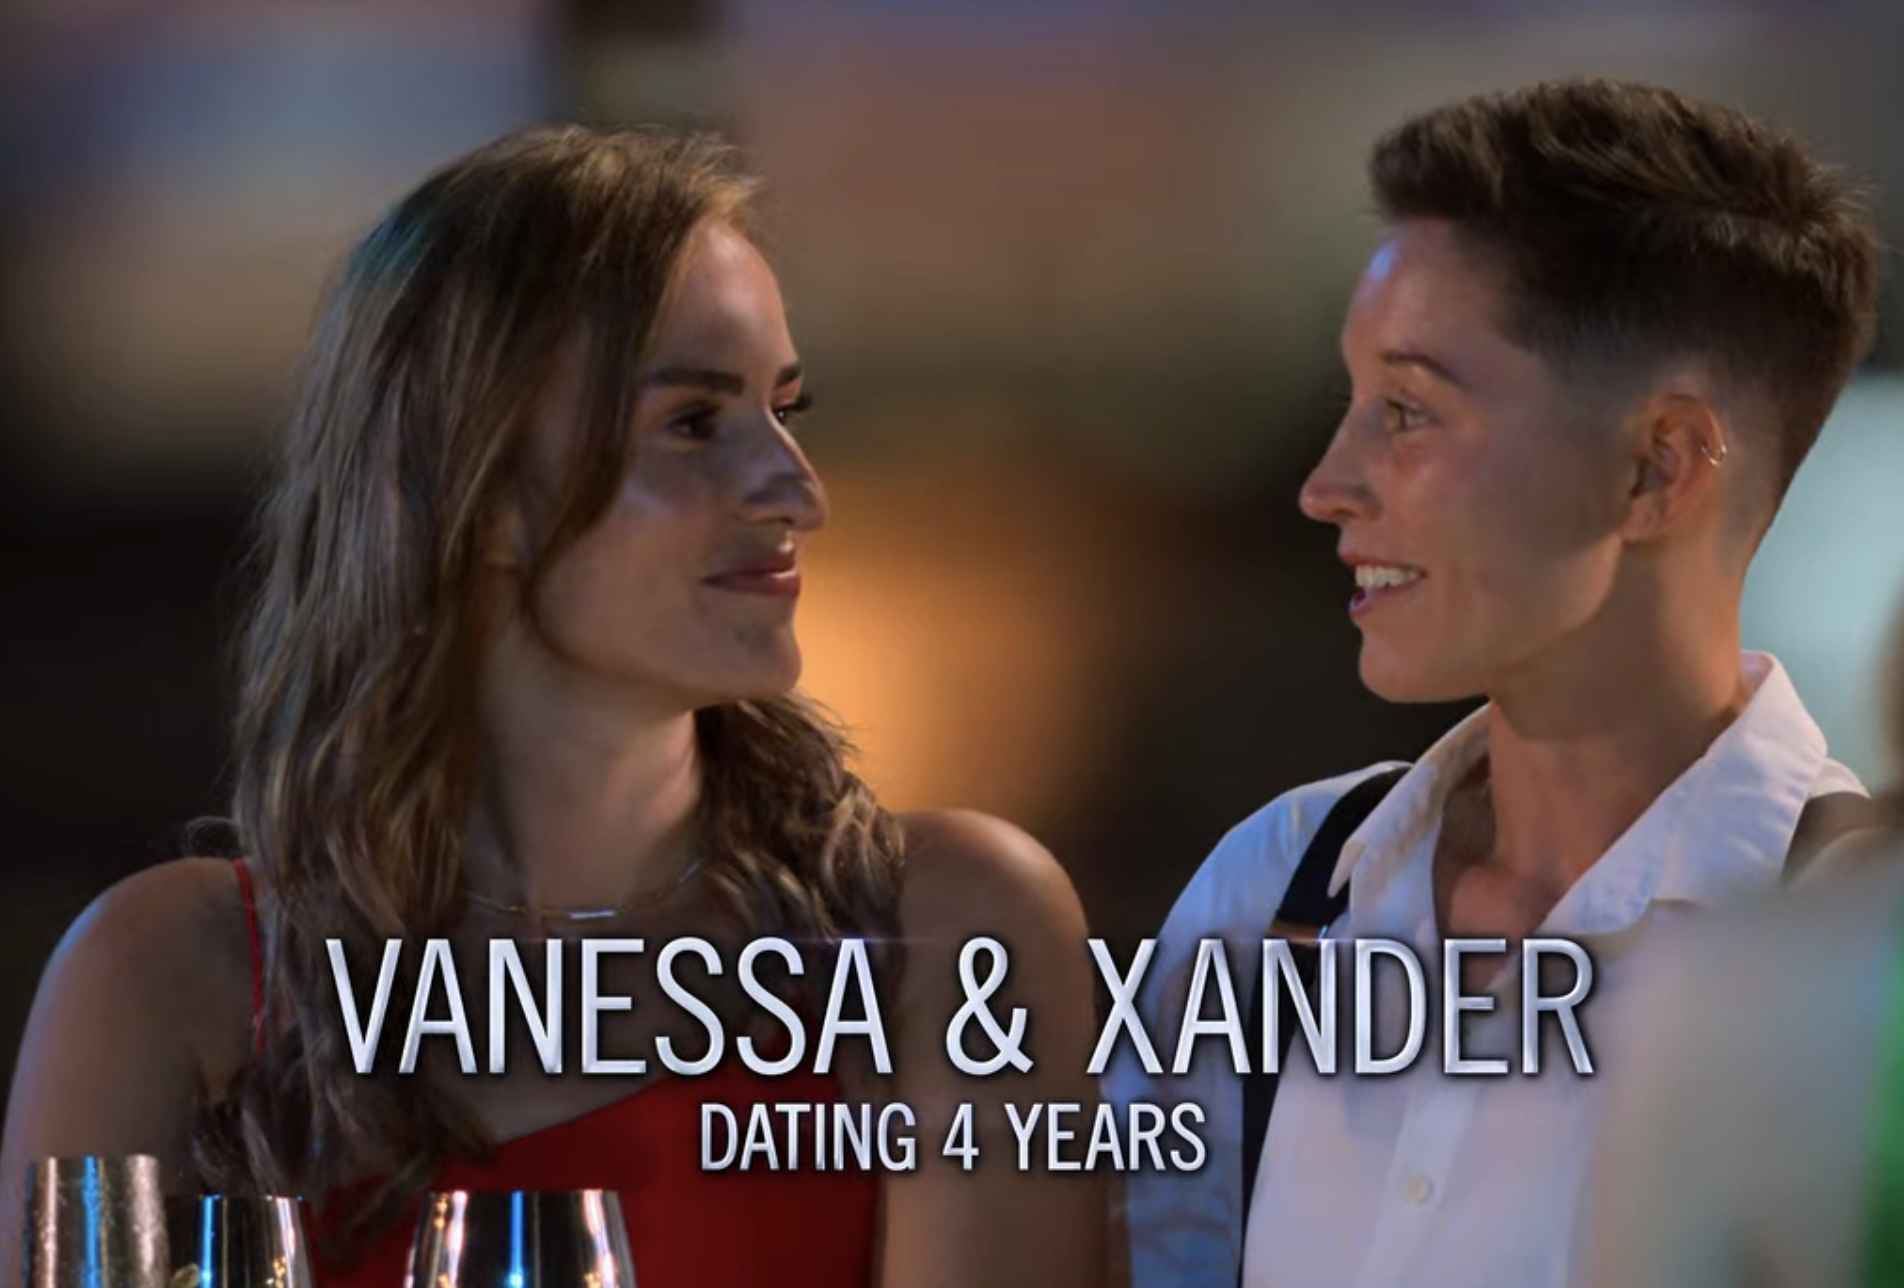 Vanessa and Xander getting introduced on the first episode on the show